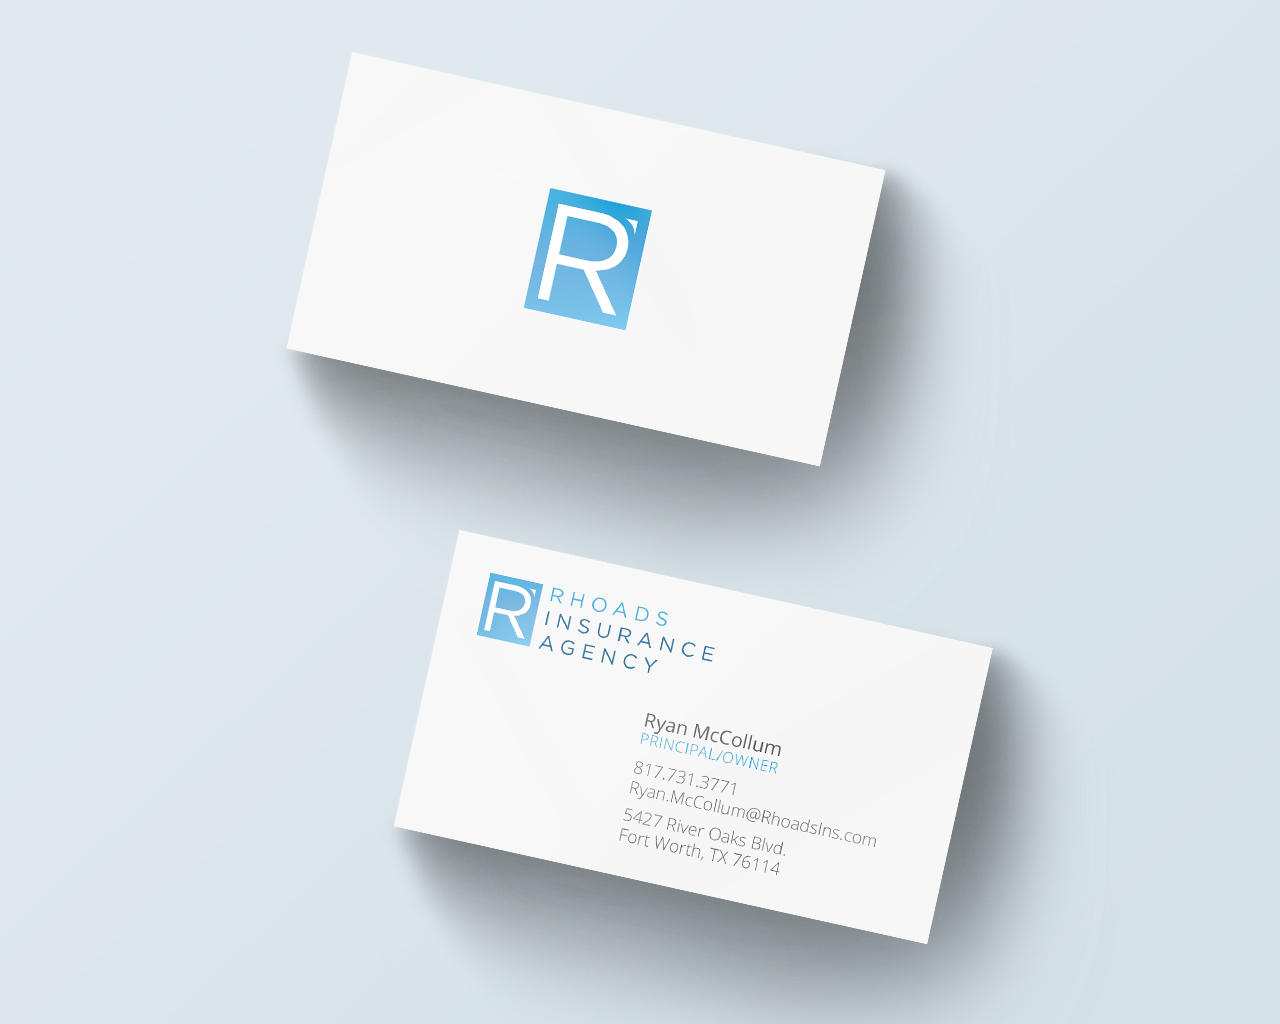 https://www.smartguests.com/images/products_gallery_images/182_custom_business_cards50.jpg